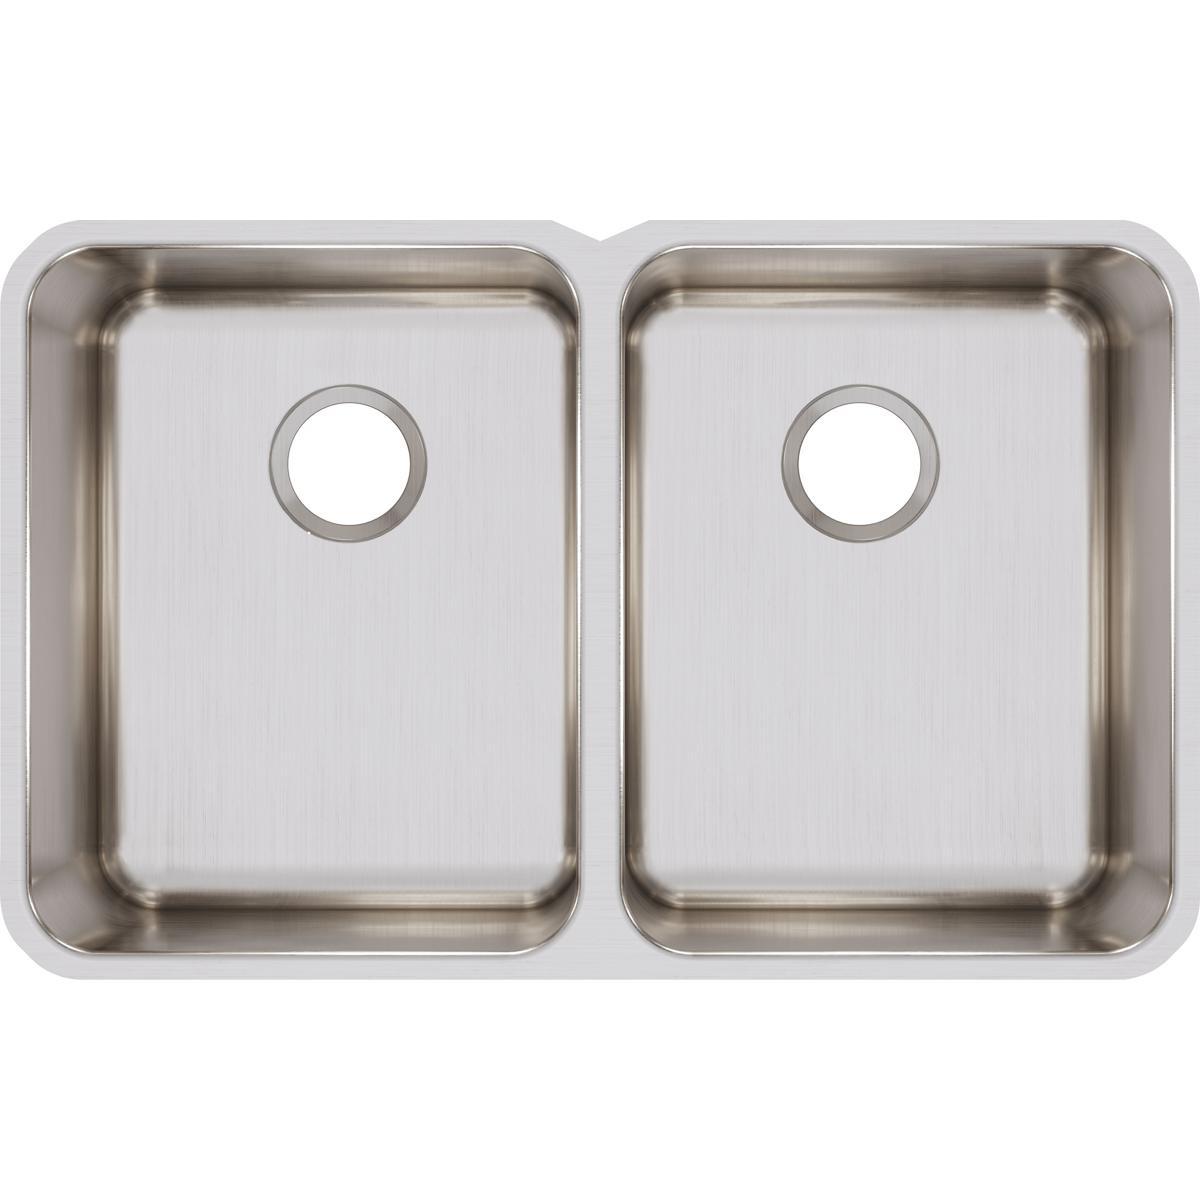 Elkay Lustertone Classic Stainless Steel 31-1/4" x 20" x 9-7/8", Equal Double Bowl Undermount Sink-DirectSinks